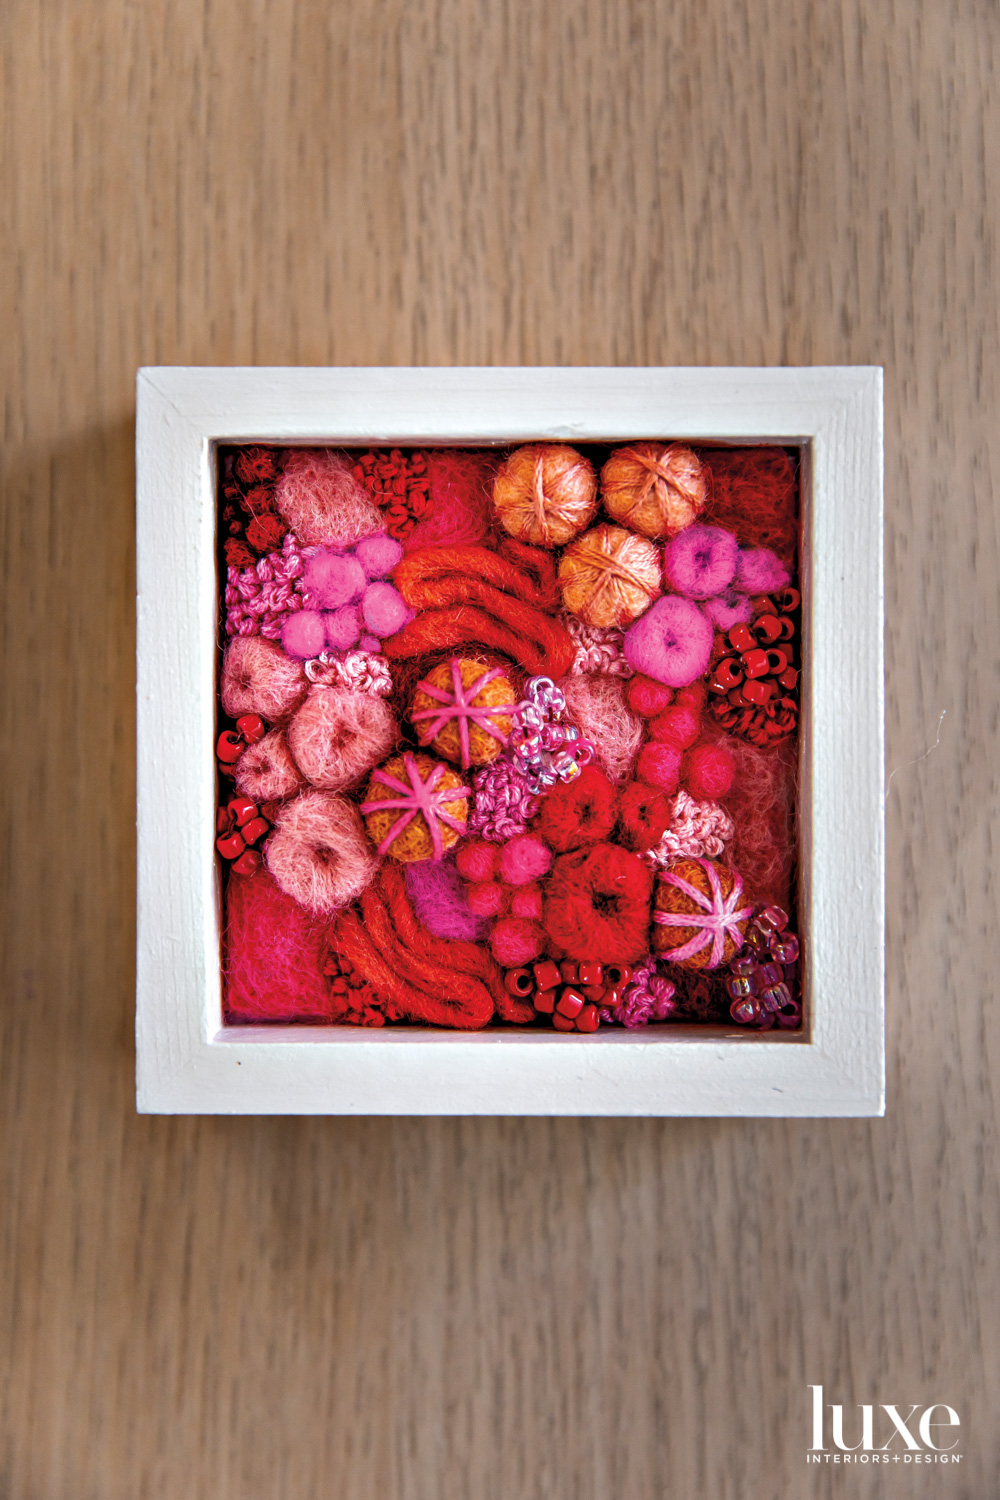 Small framed artwork composed of felted forms in reds, oranges and pinks